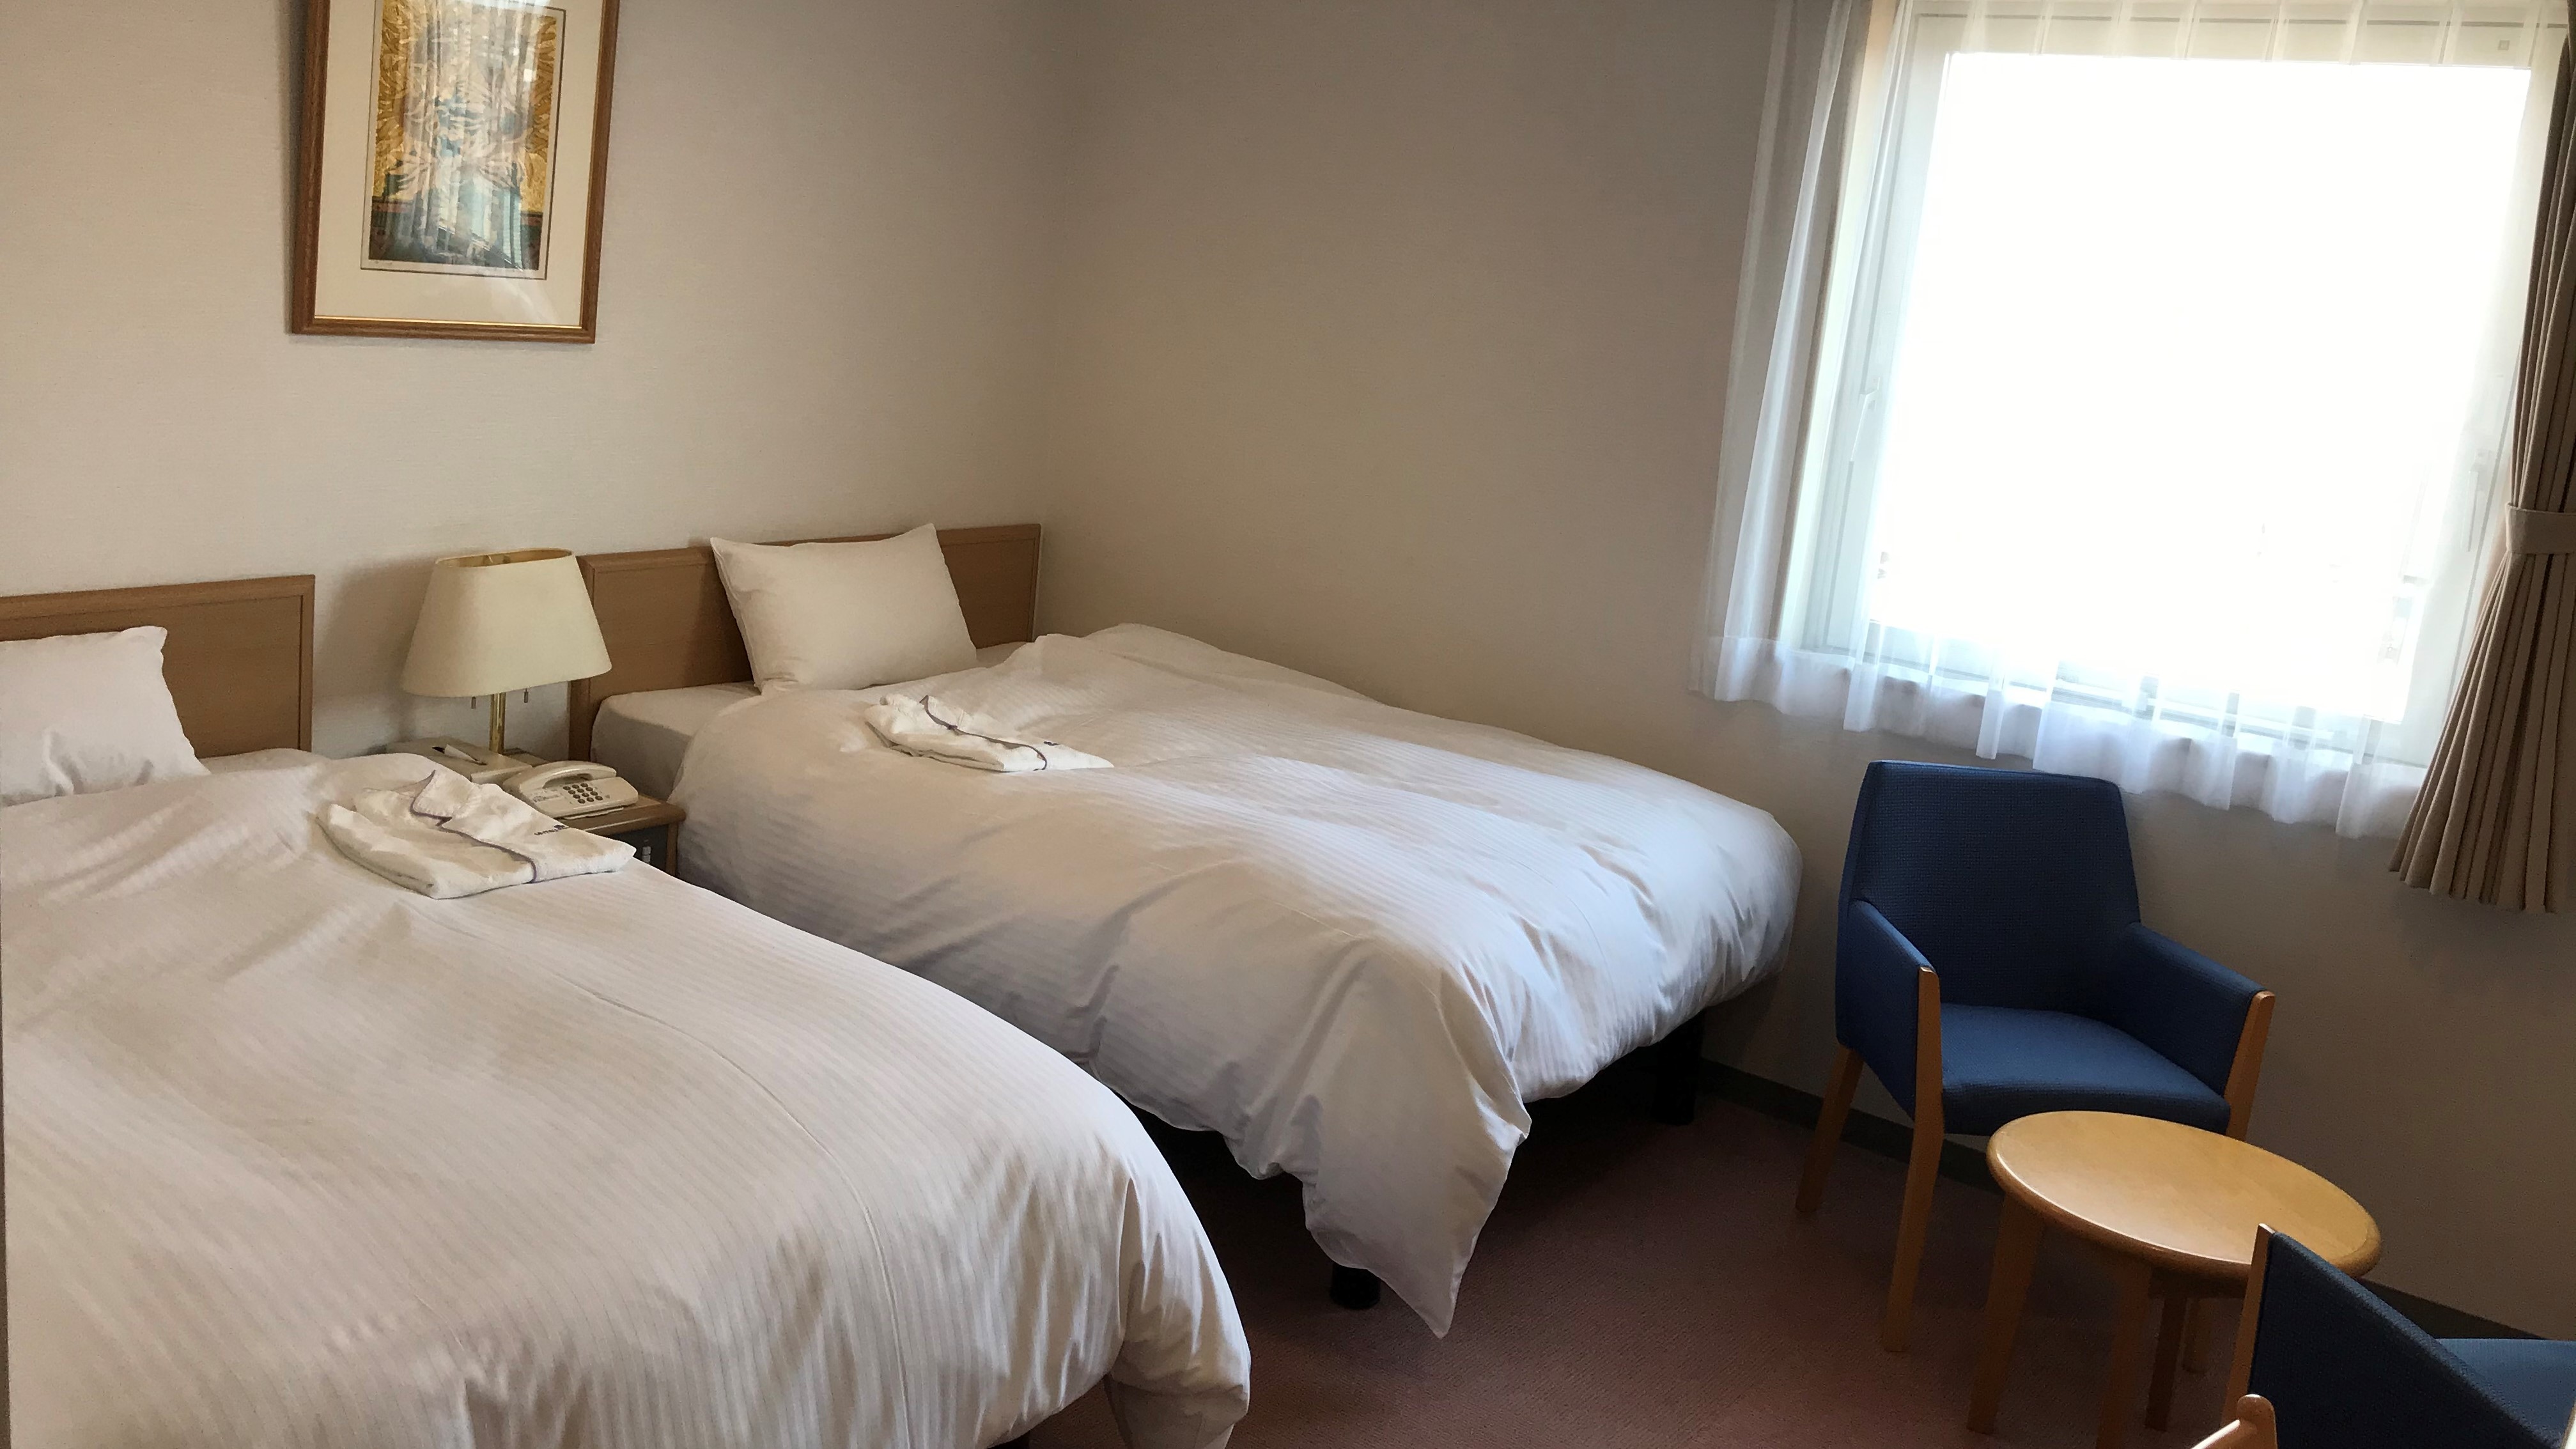 An example of a twin room. Equipped with high-quality duvet-style duvets.